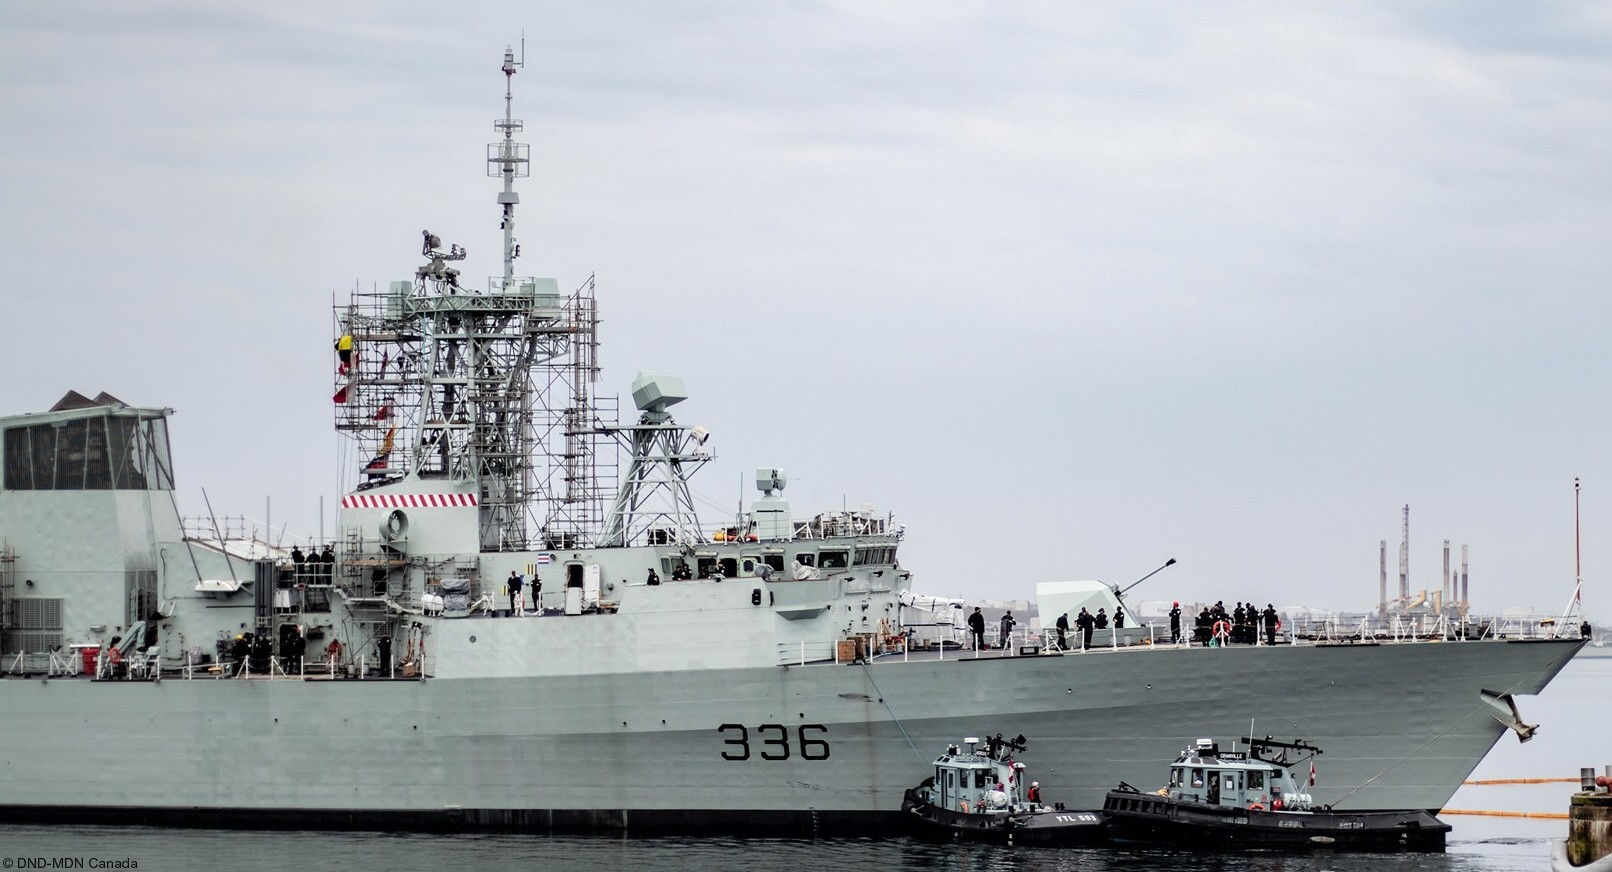 ffh-336 hmcs montreal halifax class helicopter patrol frigate ncsm royal canadian navy 10